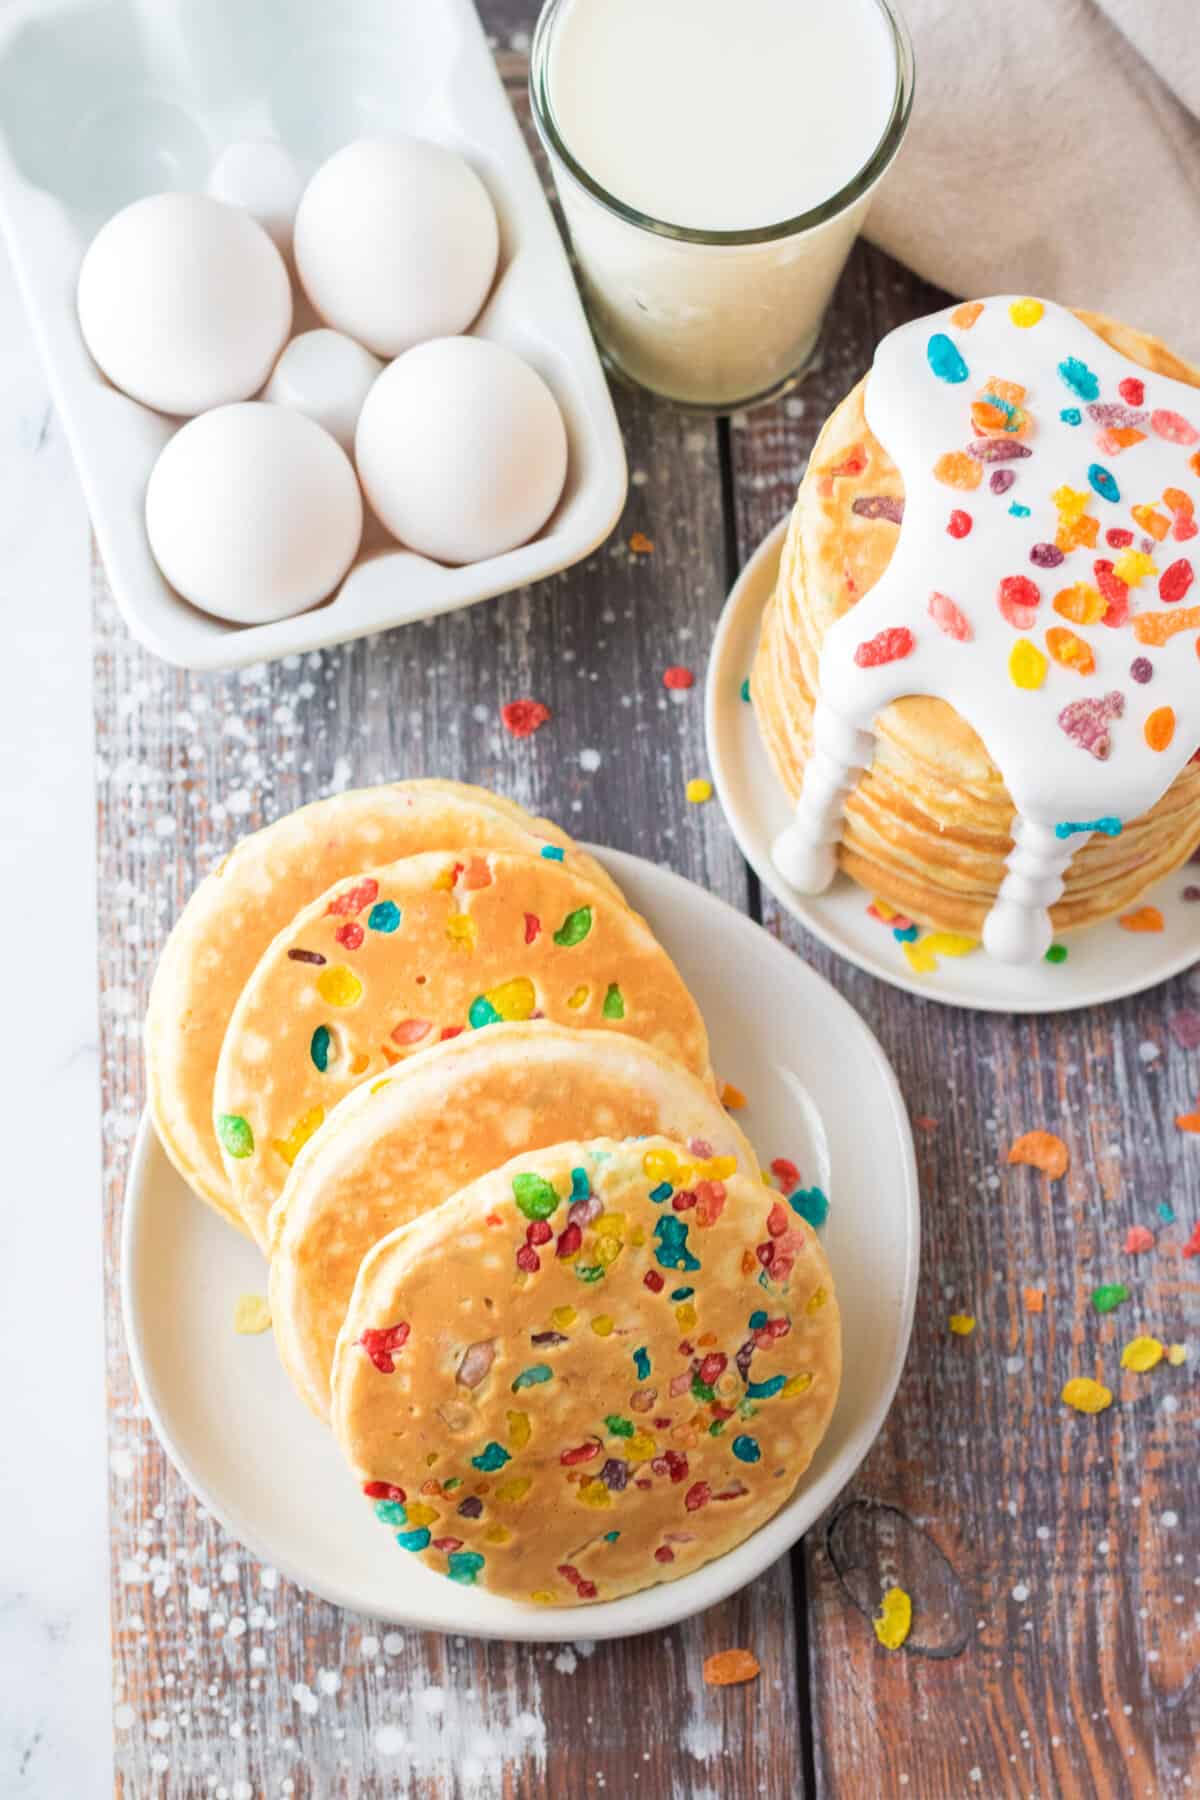 A carton of eggs is placed next to one stack of plain pancakes and another with marshmallow fluff.